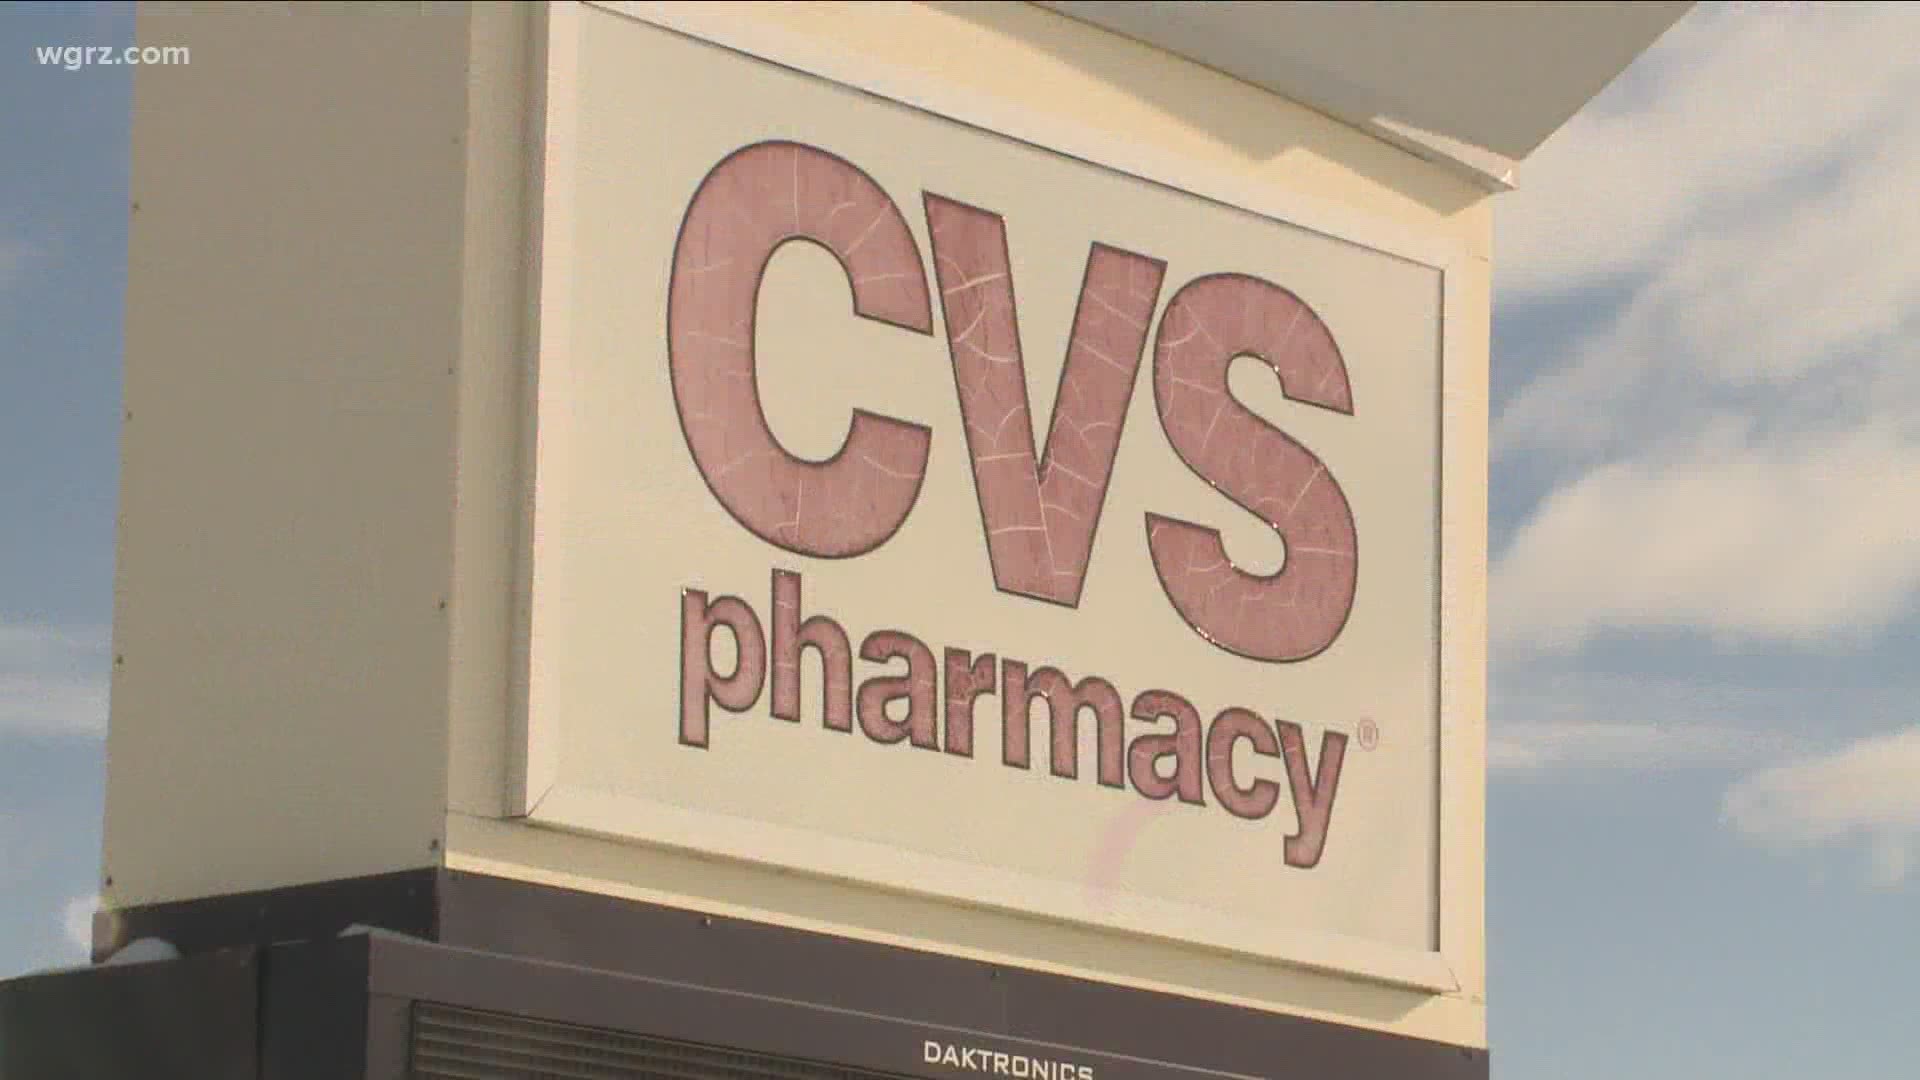 CVS says additional vaccinations – of 20,600 doses thanks to this increase from the federal government will be done at 32 CVS locations across the state,